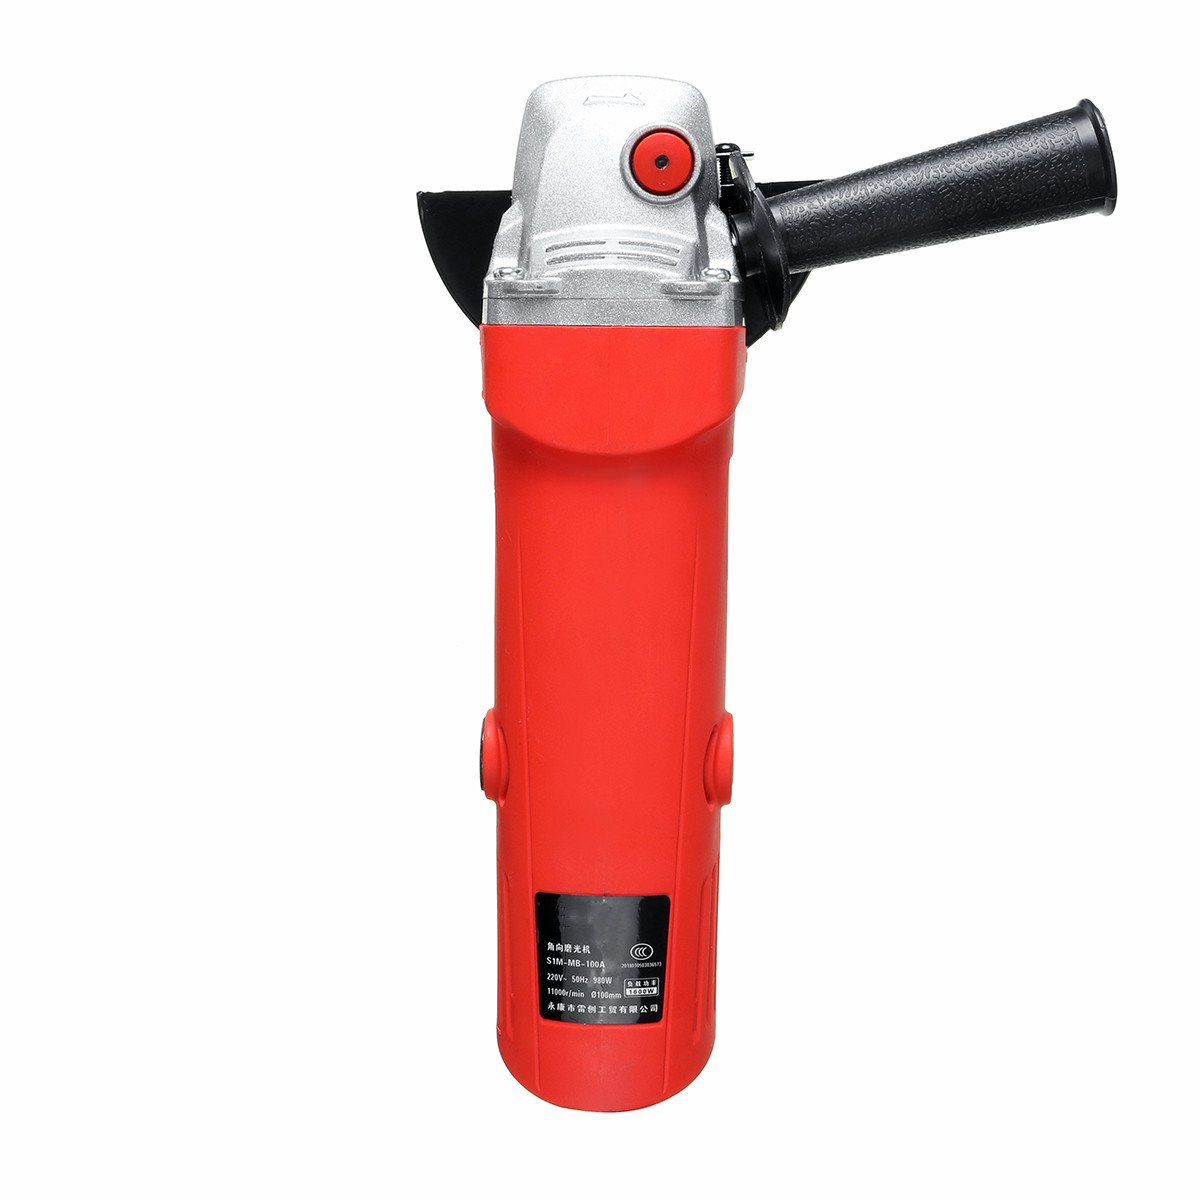 1500W-Angle-Grinder-With-100mm-Grinding-Disc-4-Electric-Corded-Sander-Cutter-1628131